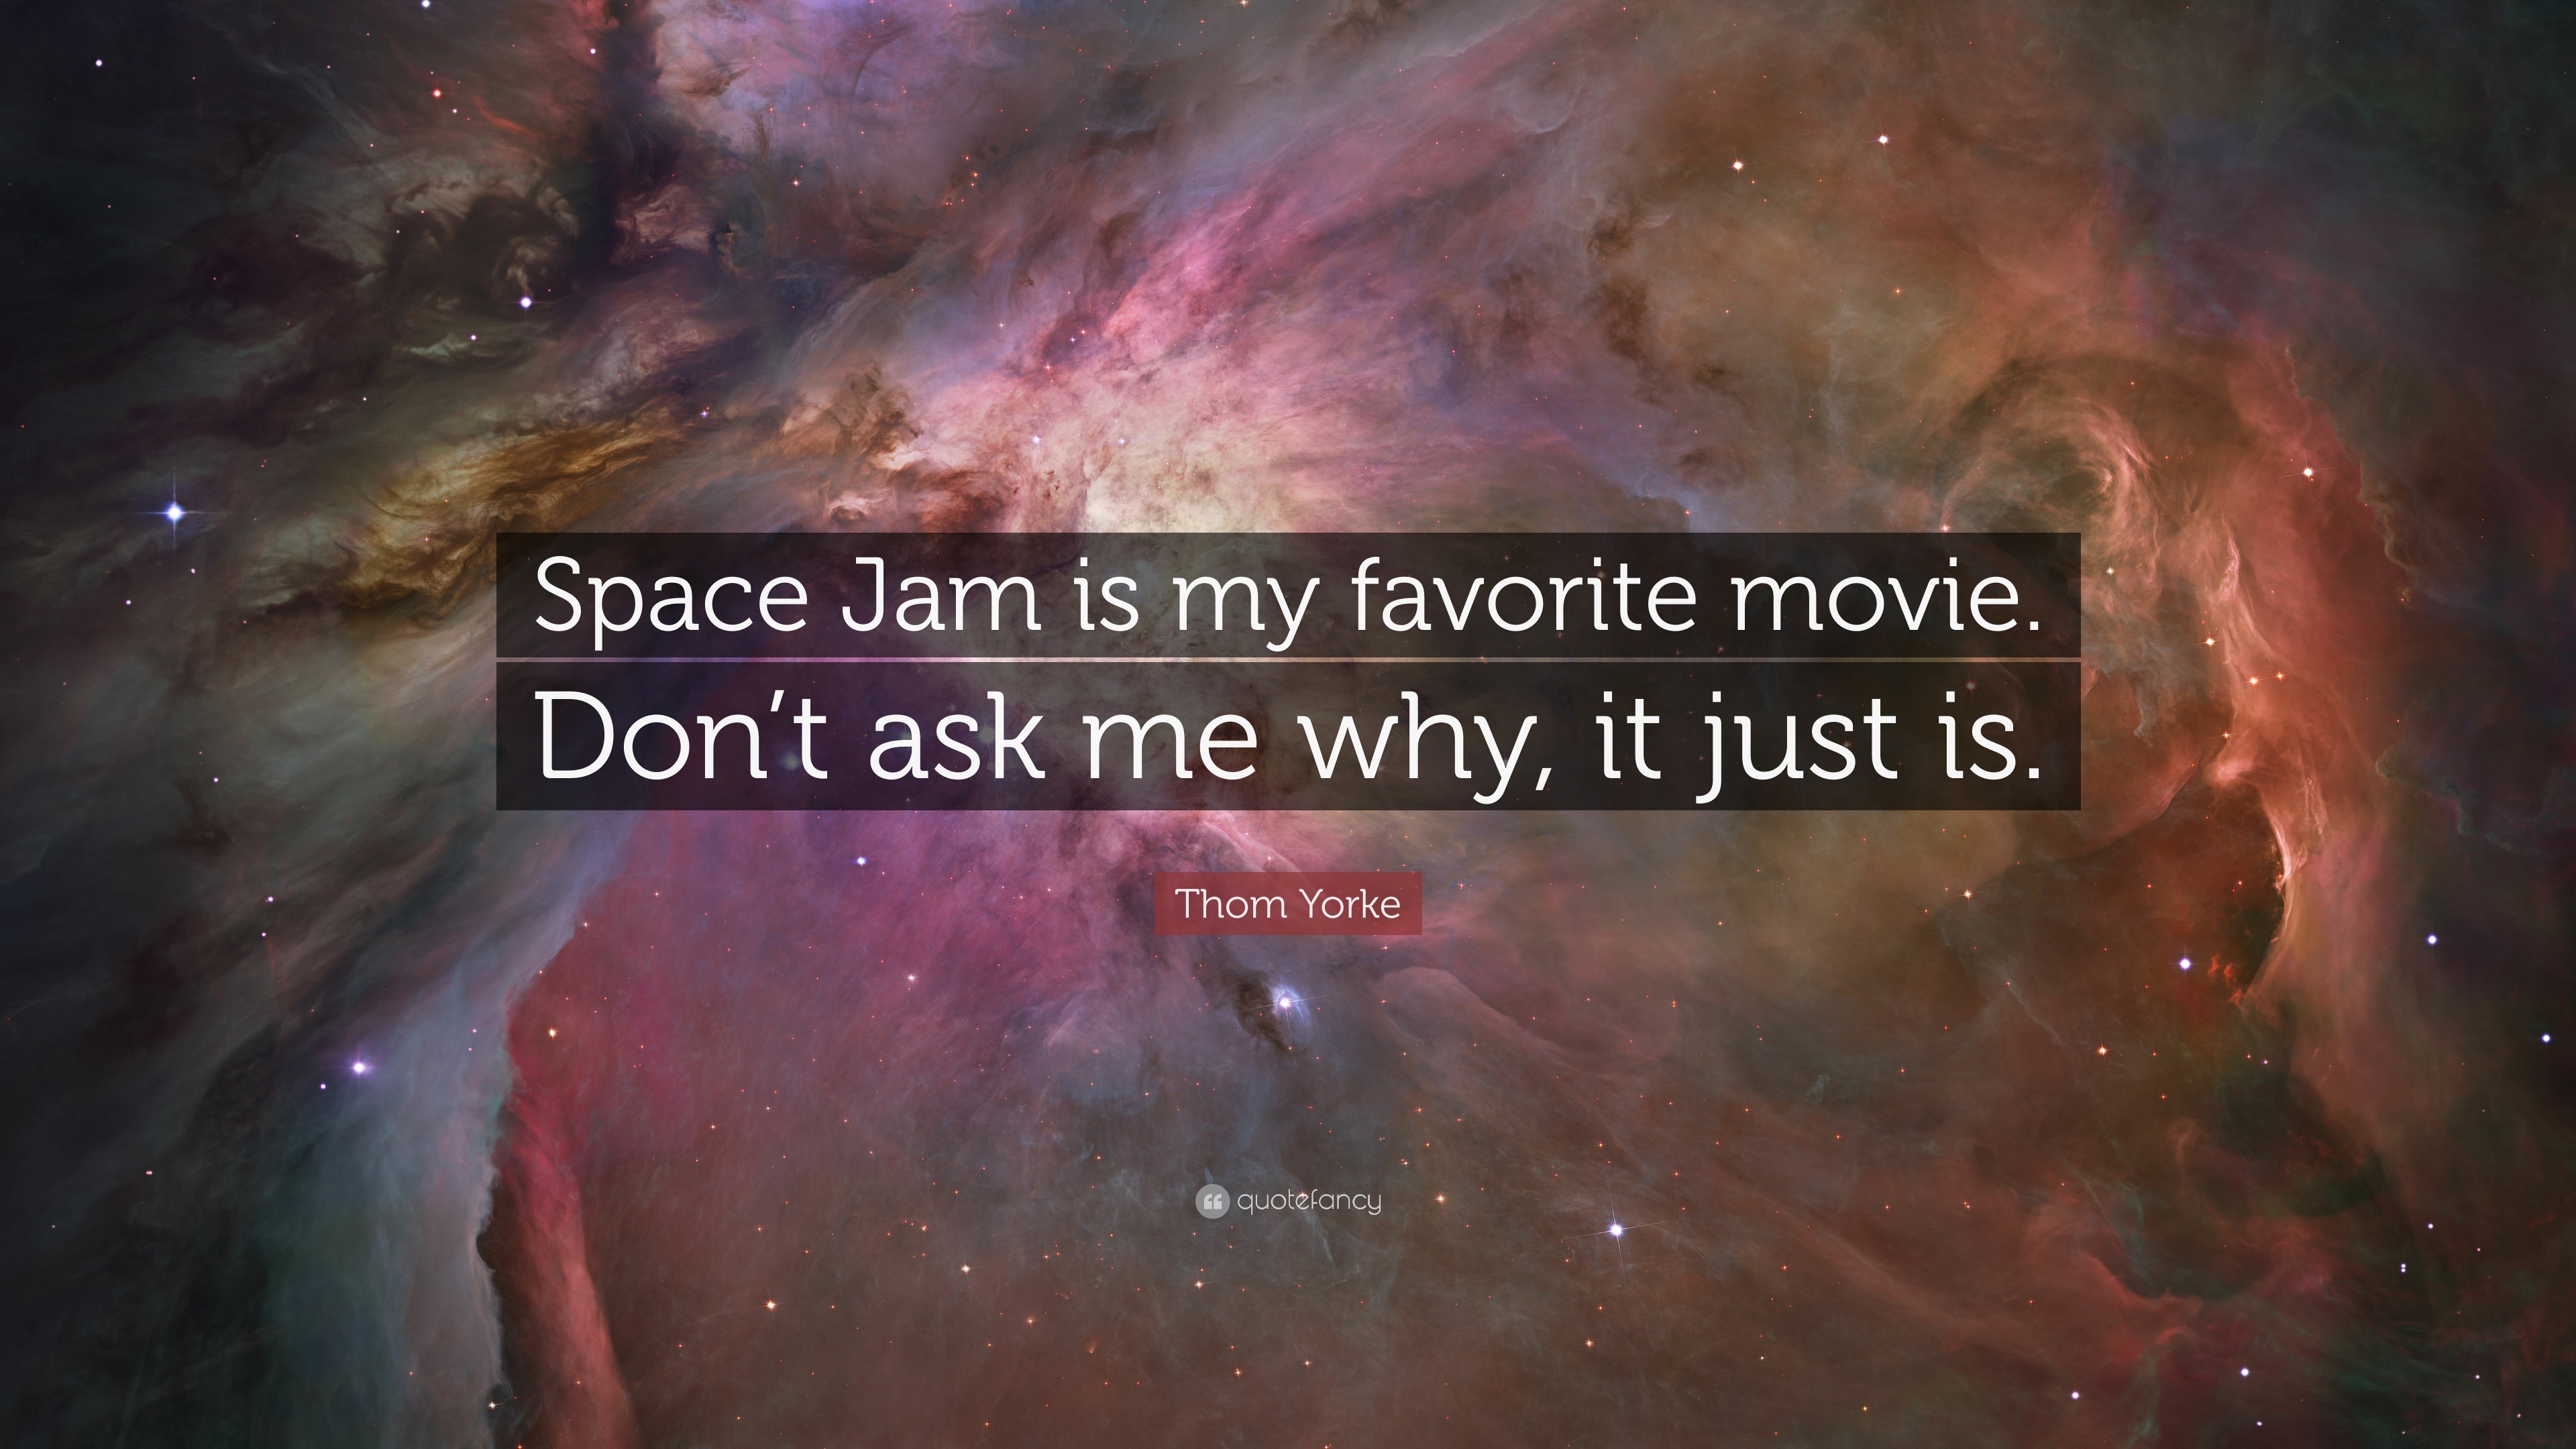 Thom Yorke Quote Space Jam is my favorite movie. Dont ask